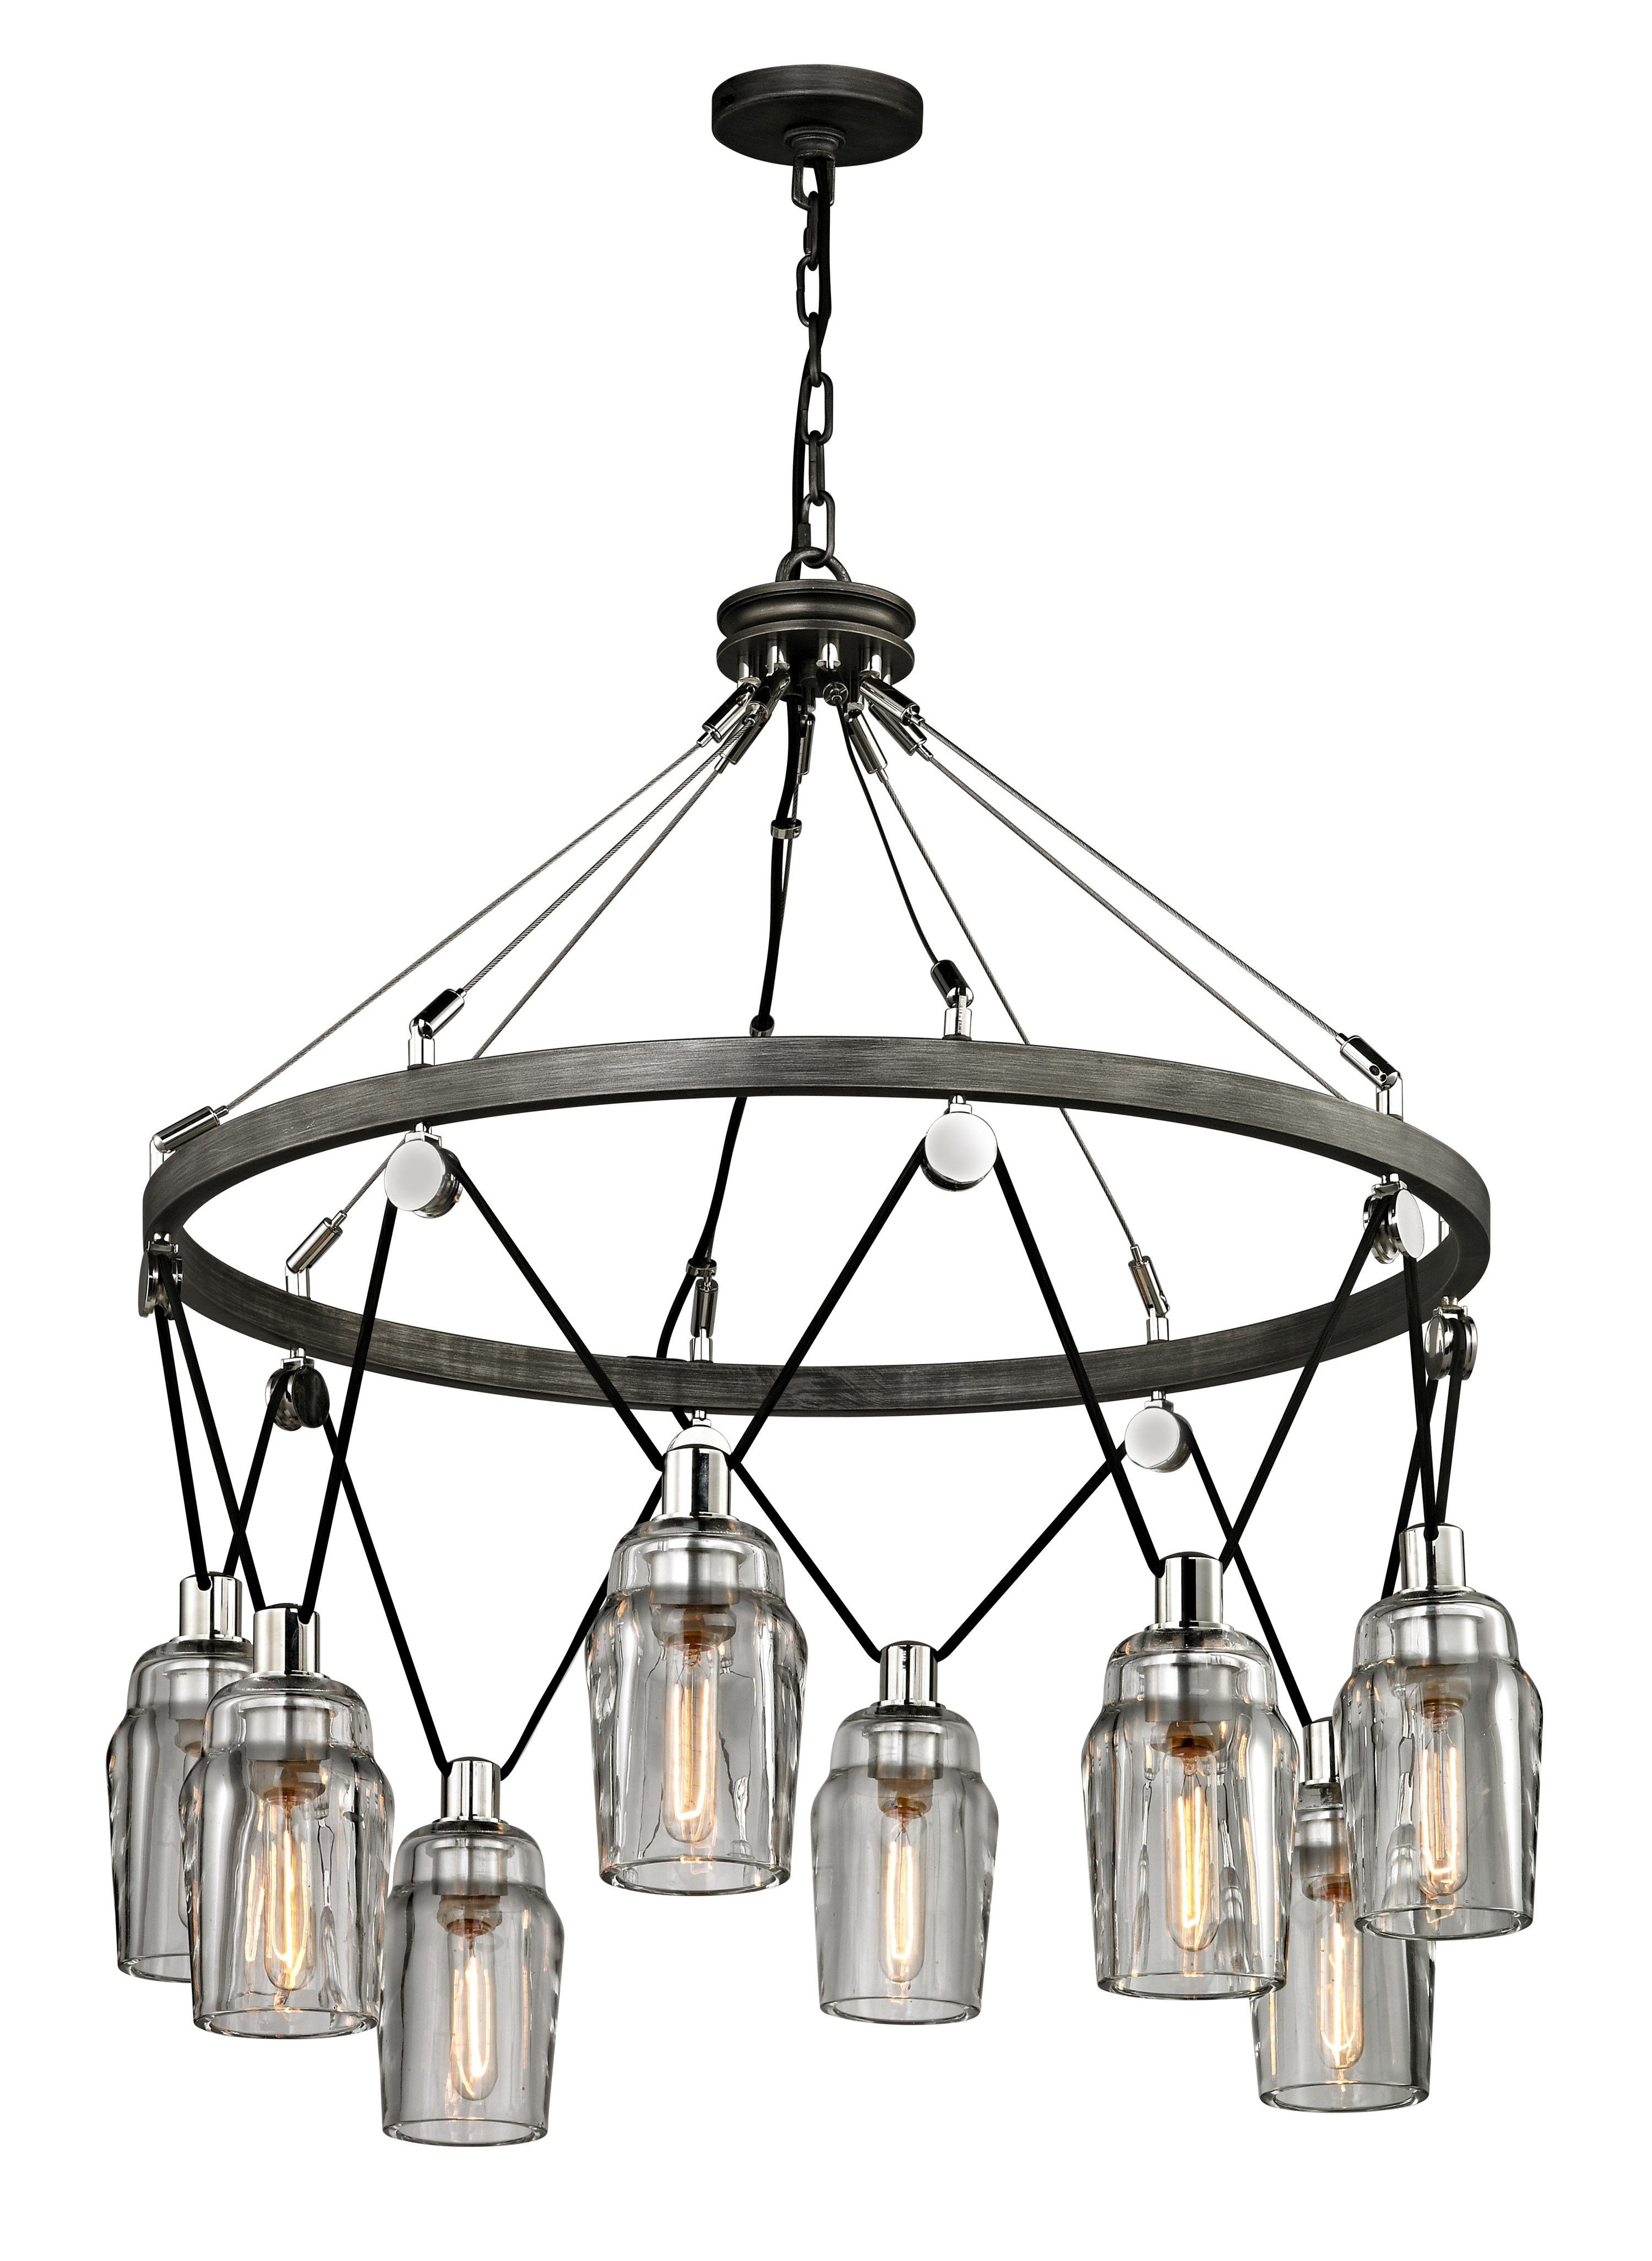 Citizen, by Troy Lighting’s unique focal point is its pulley system with one continuous wire running through its frame, powering and suspending each light at various heights.